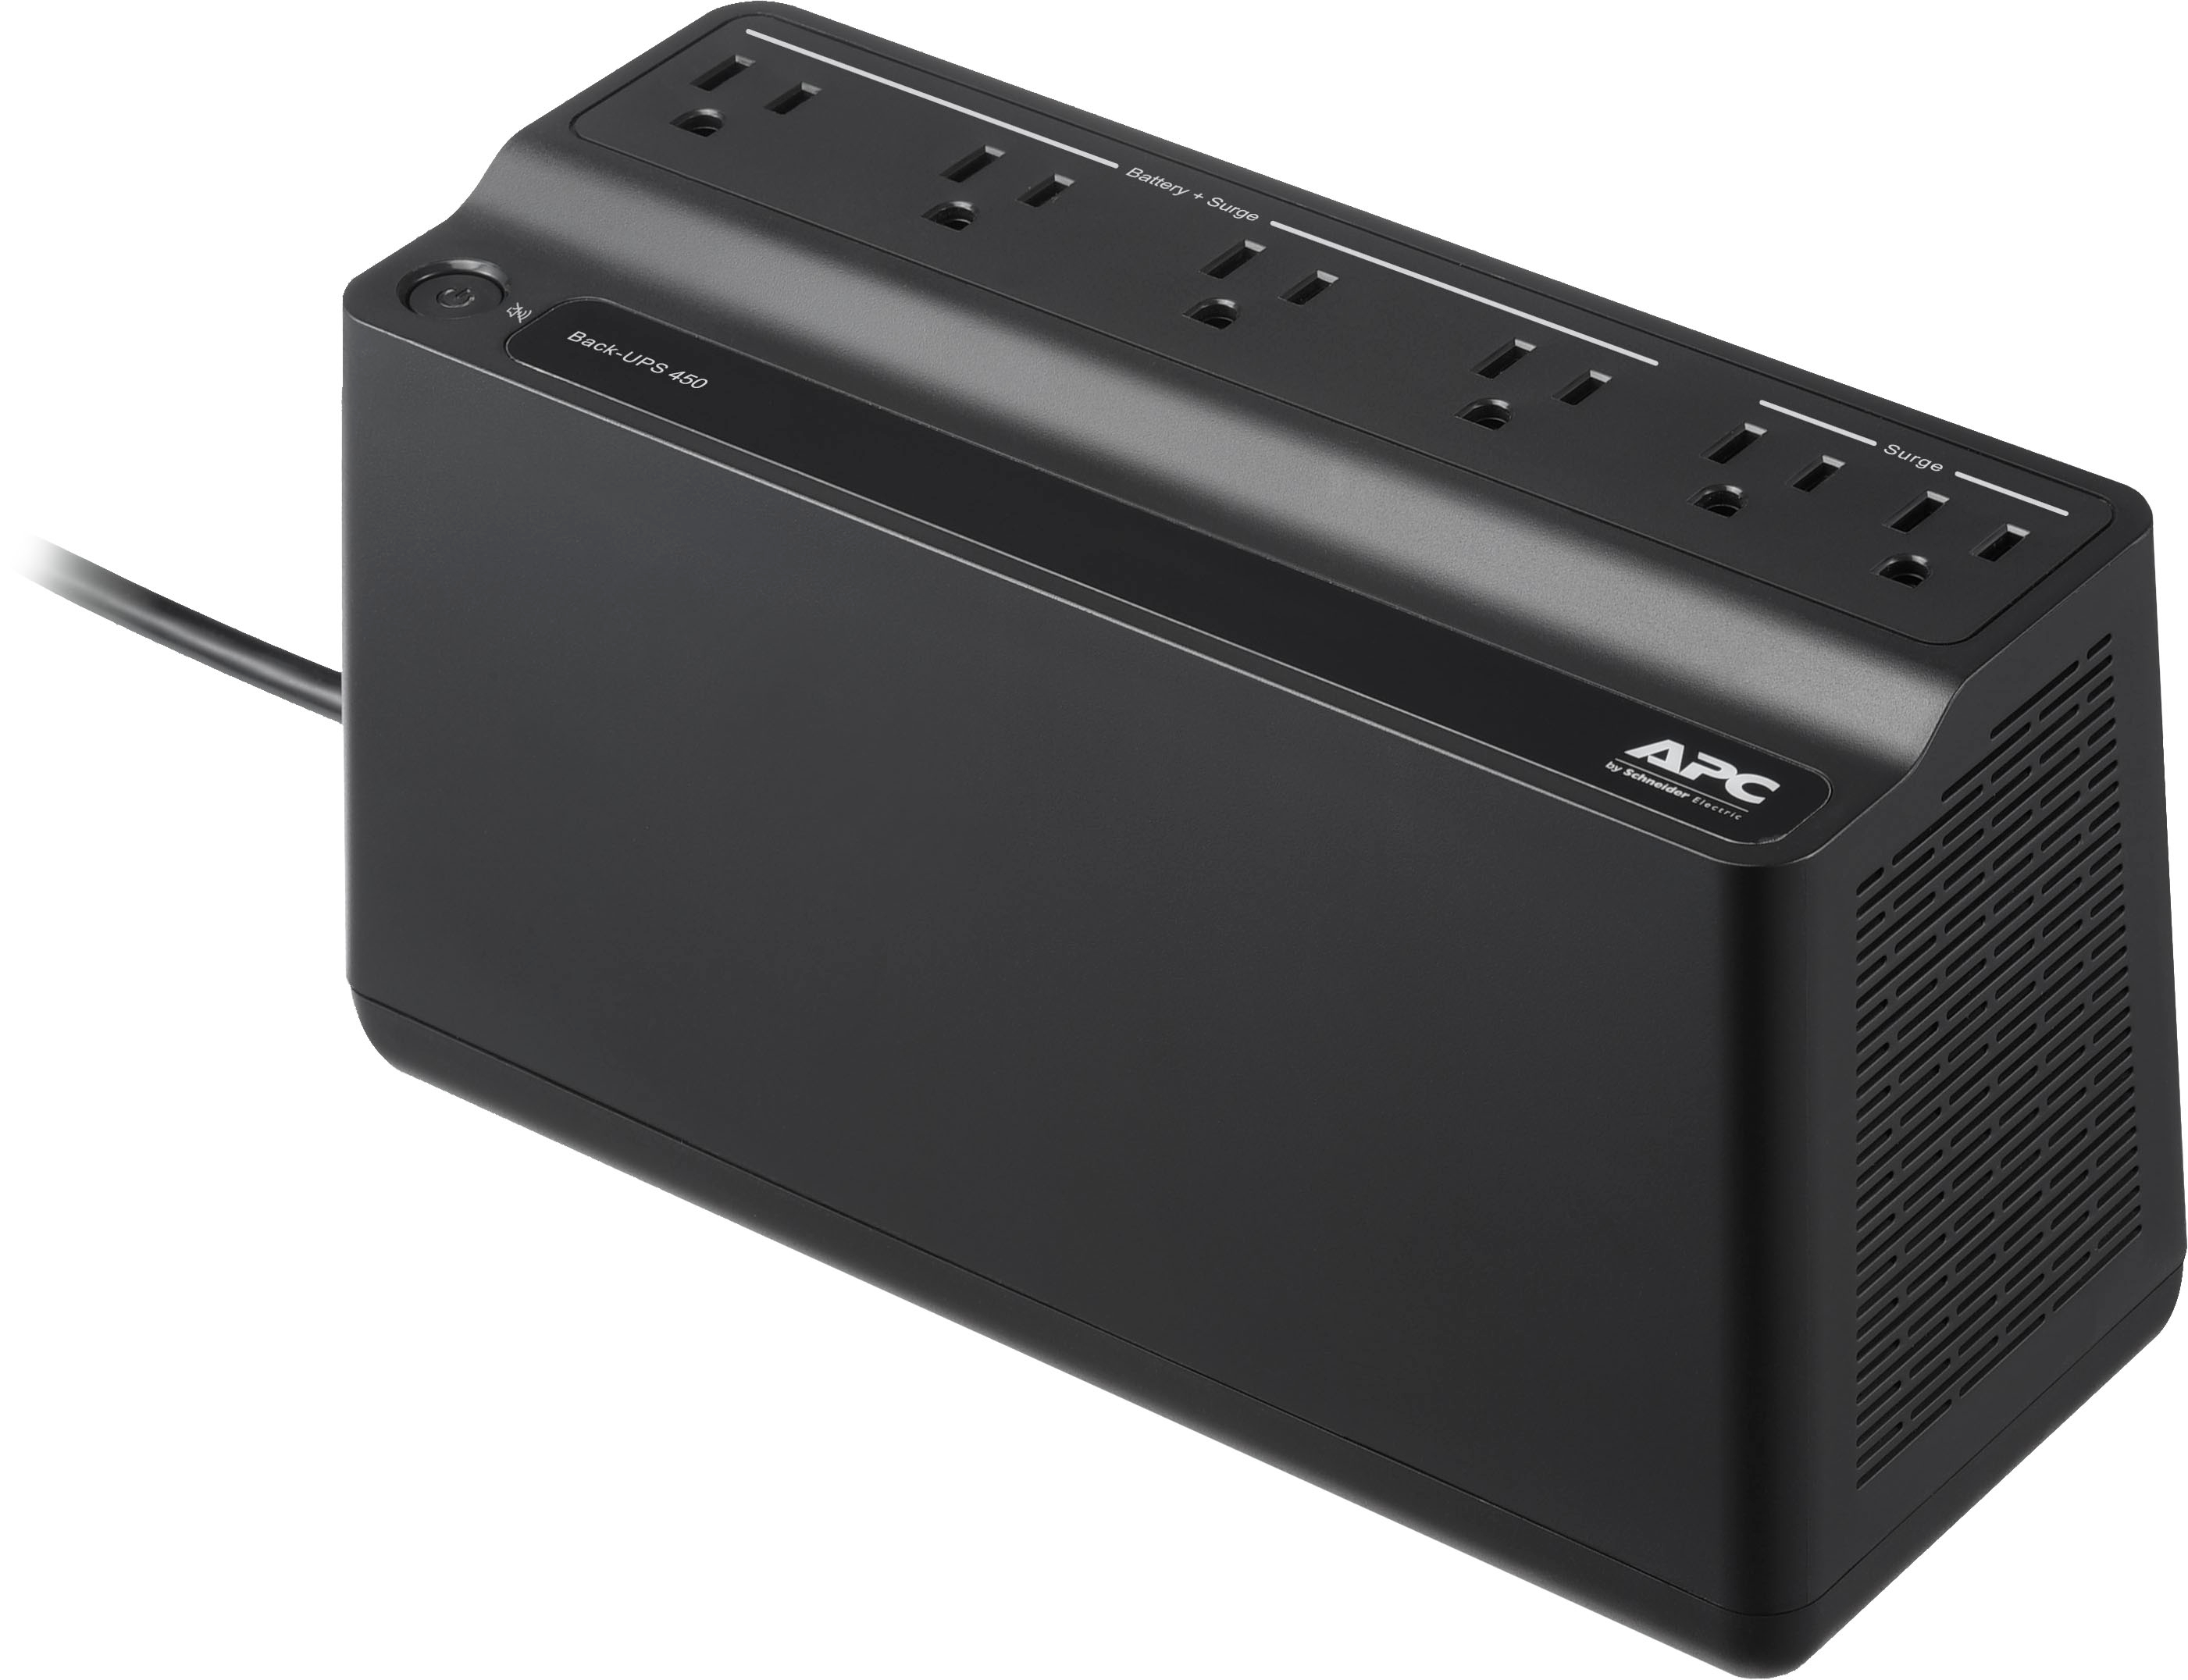 Questions and Answers: APC Back-UPS Connect 450VA Tower UPS Black ...